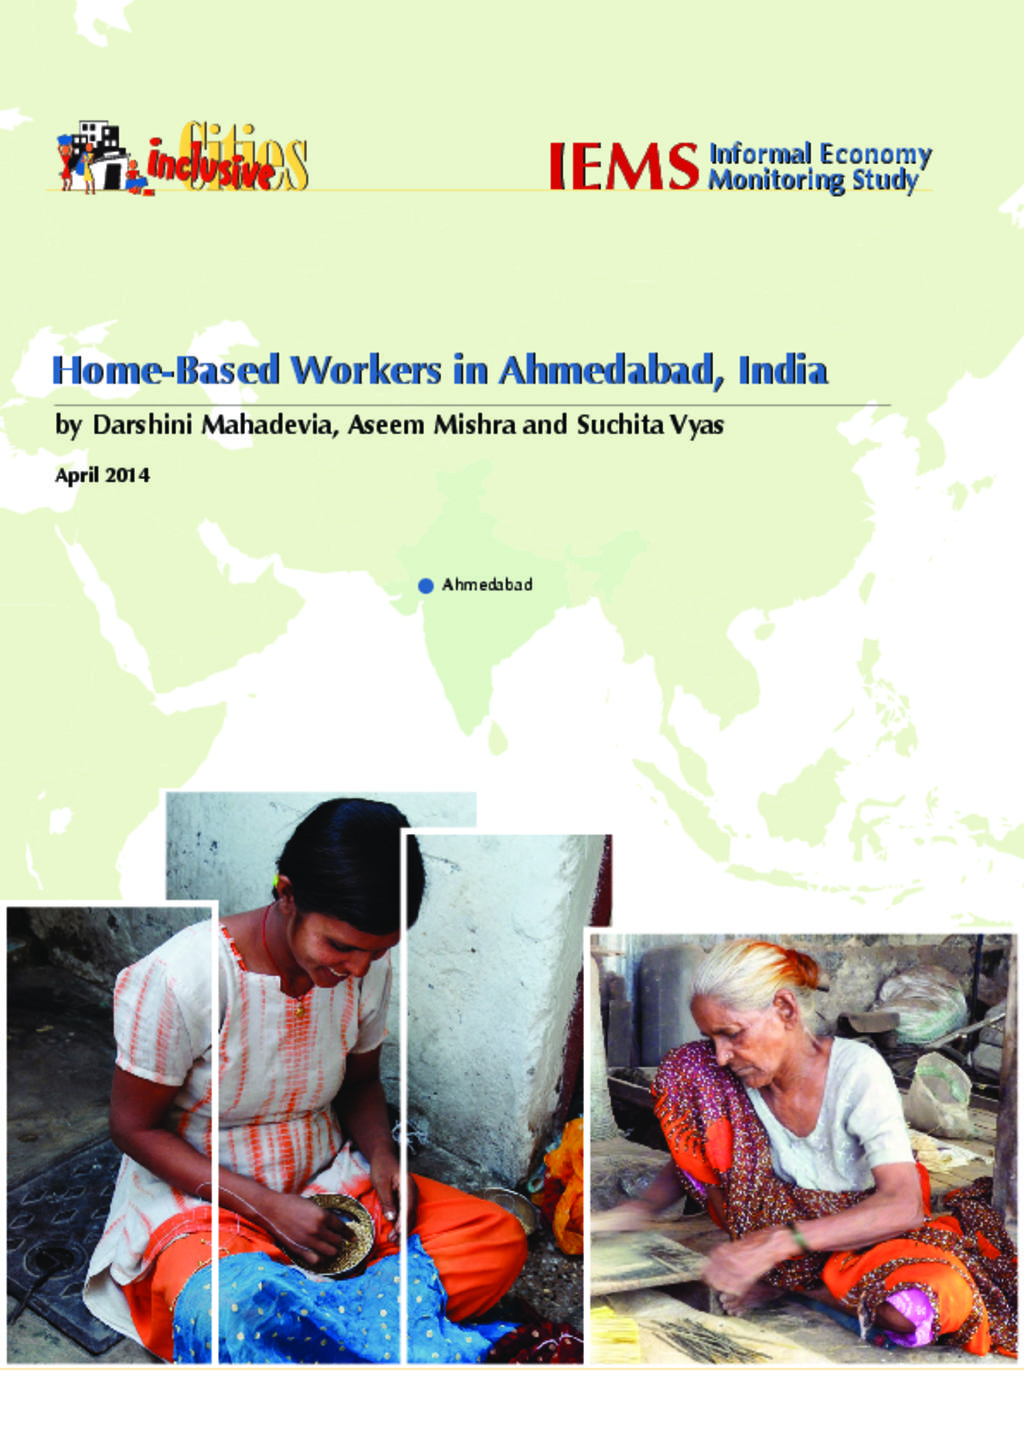 Home-Based Workers in Ahmedabad, India